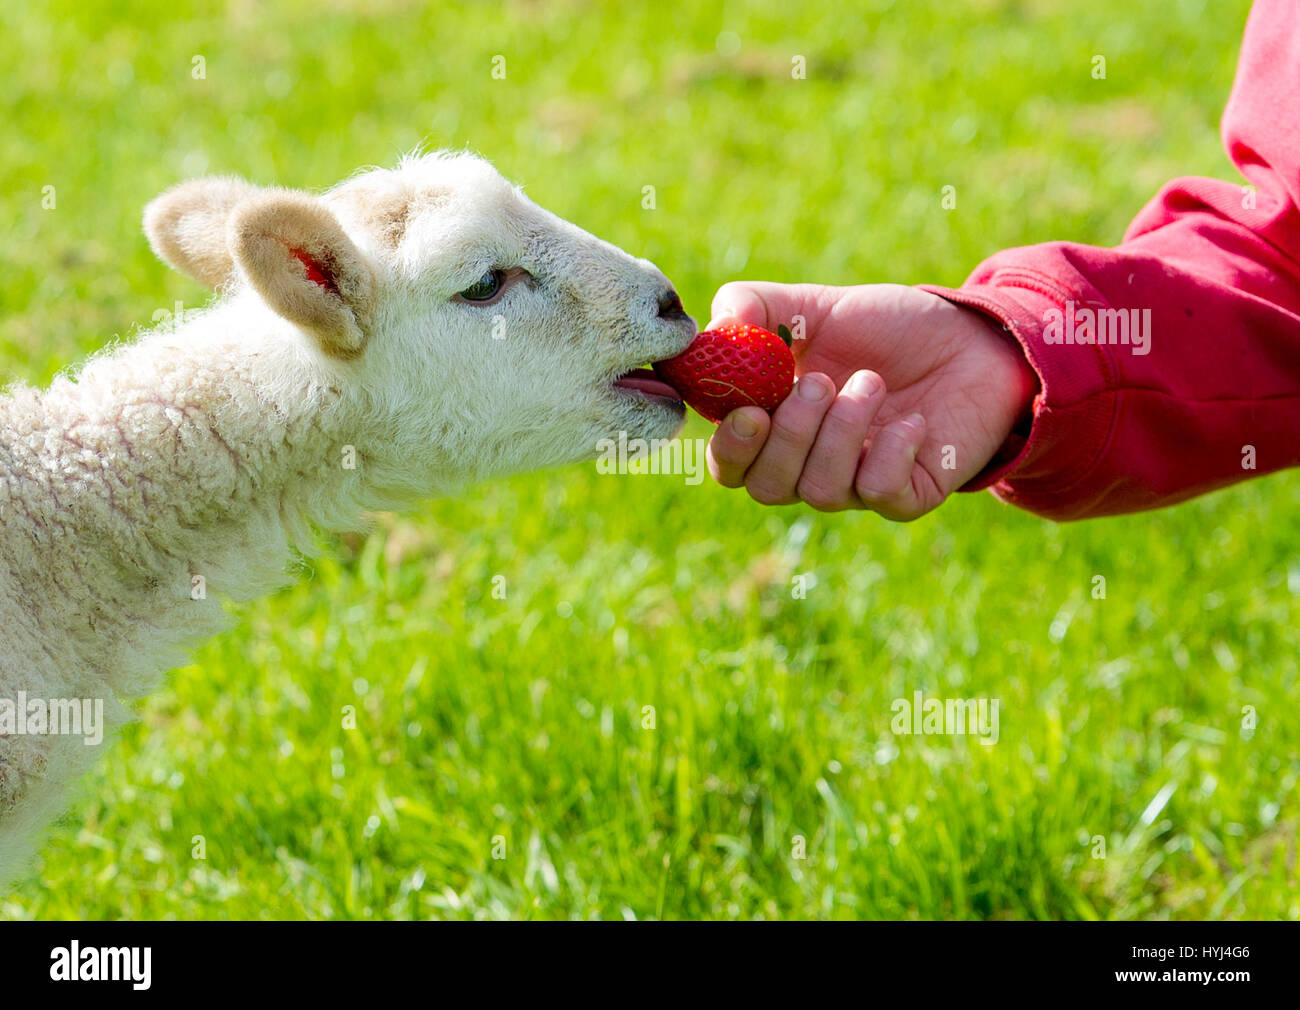 Bolton, UK. 4th Apr, 2017. Beautiful warm spring sunshine enticed this two day old lamb out into the light at Smithills Hall Farm, Bolton, Lancashire. The furry fellow took its first steps out in the outside world and also got a taste of its first strawberry as the sunny weather continued in the North West of England. Picture by Paul Heyes, Tuesday April 04, 2017. Credit: Paul Heyes/Alamy Live News Stock Photo